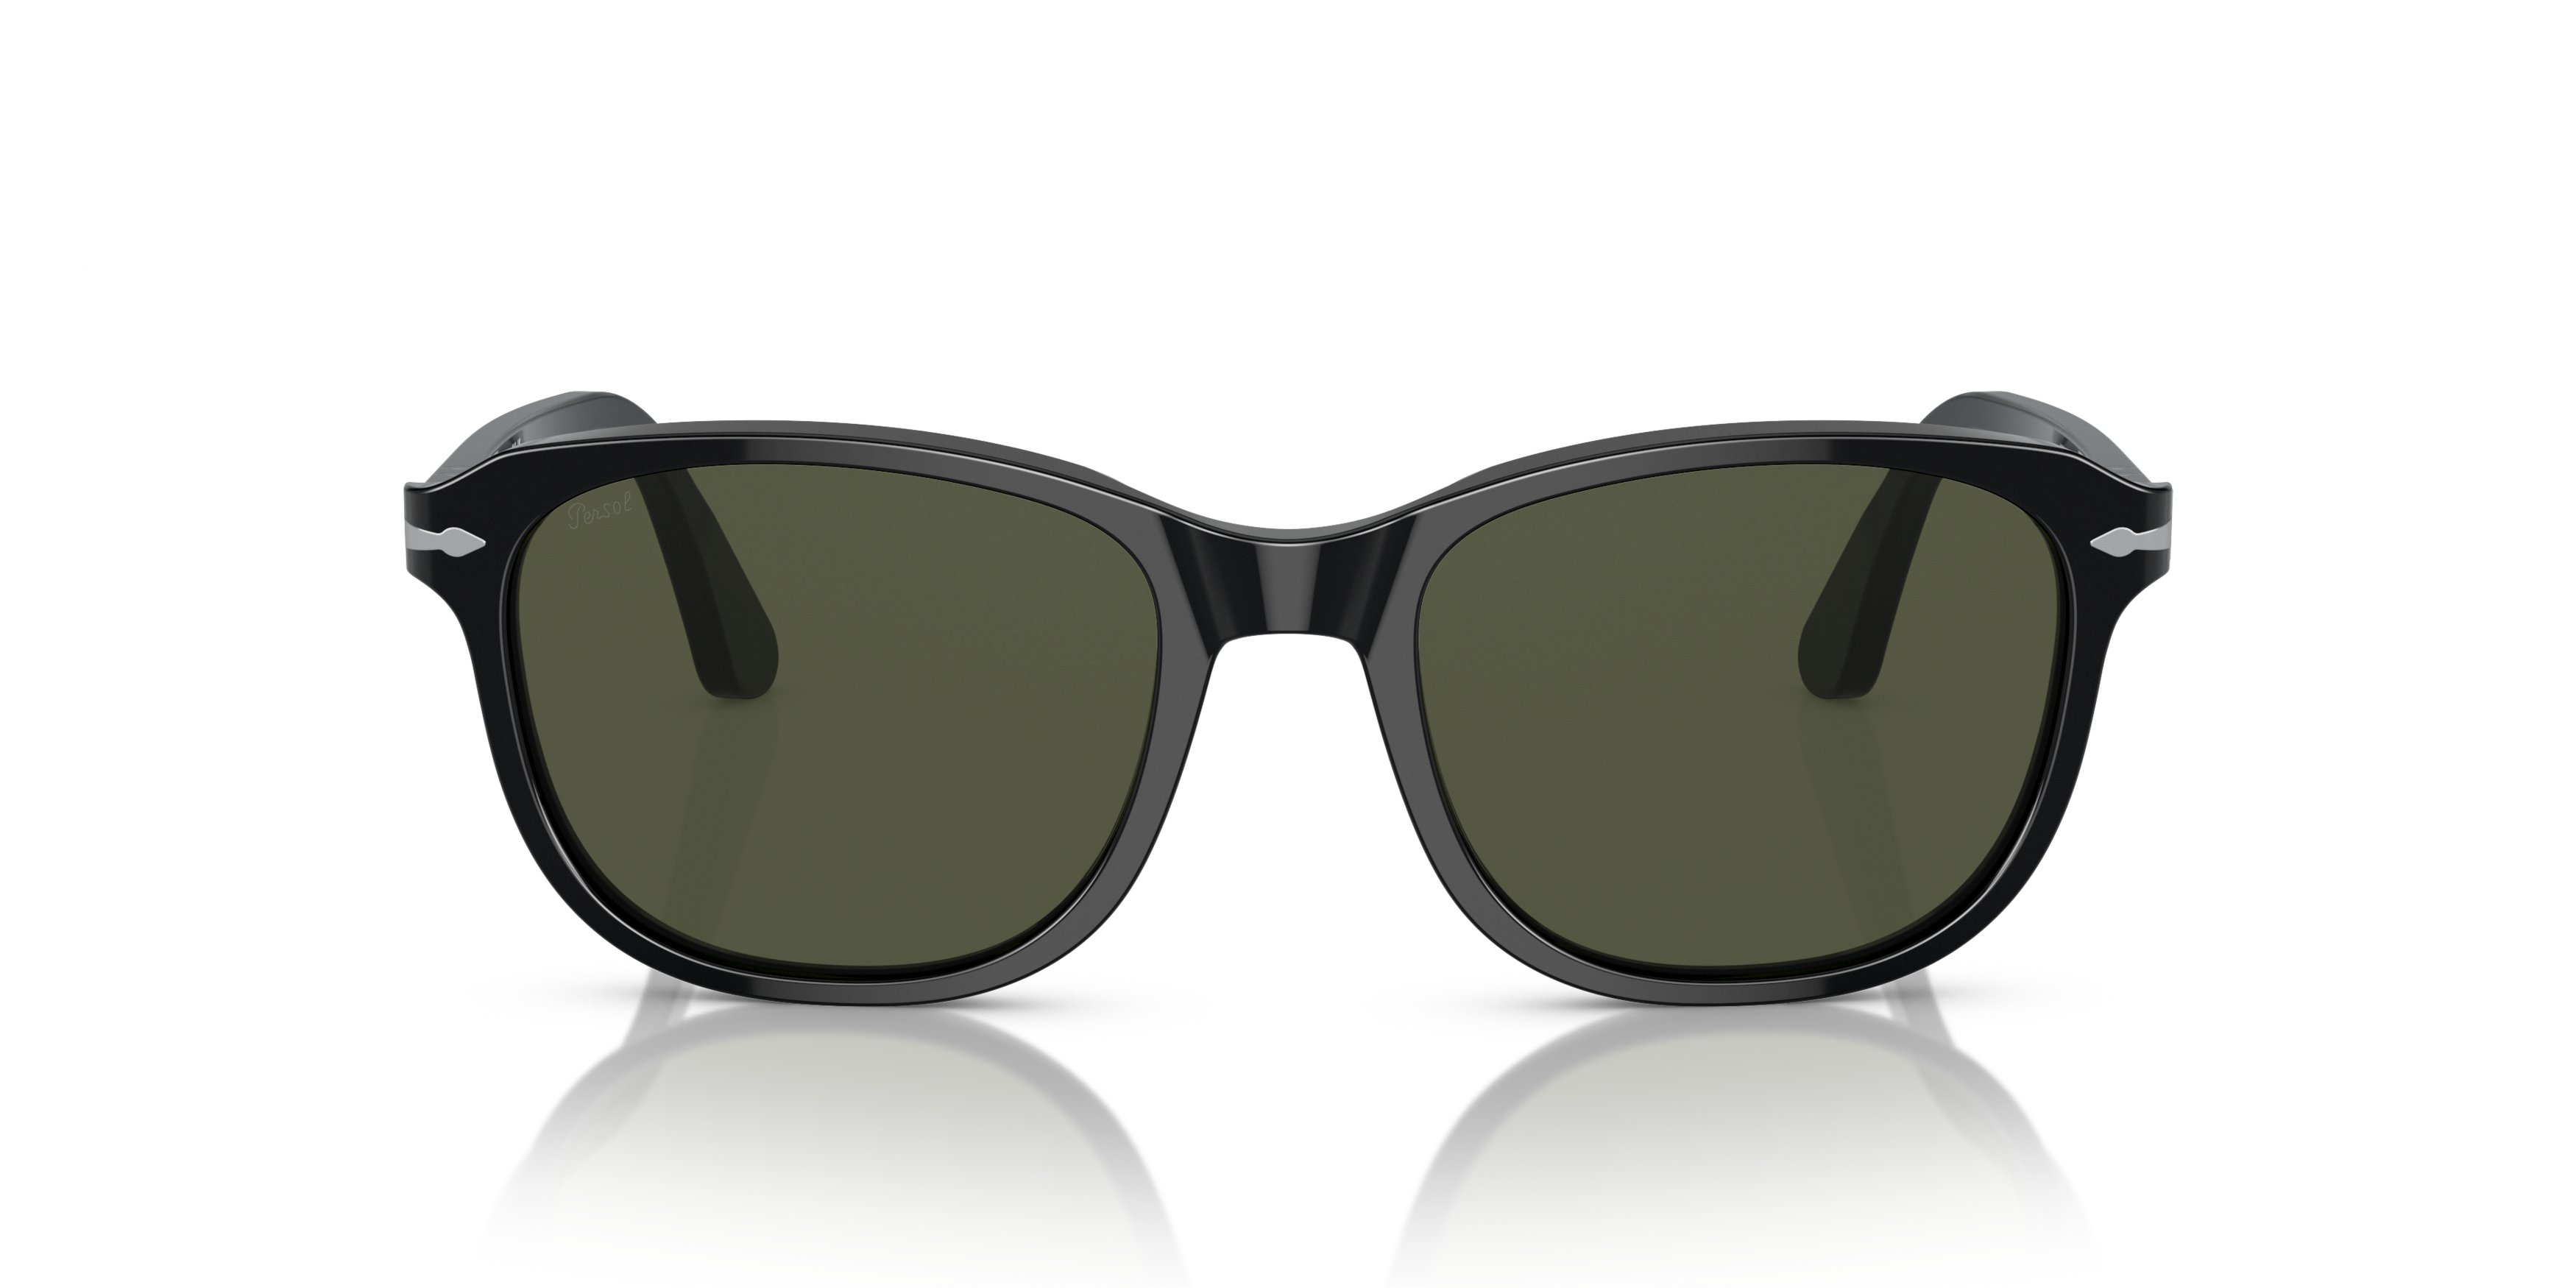 [products.image.front] Persol 0PO1935S 95/31